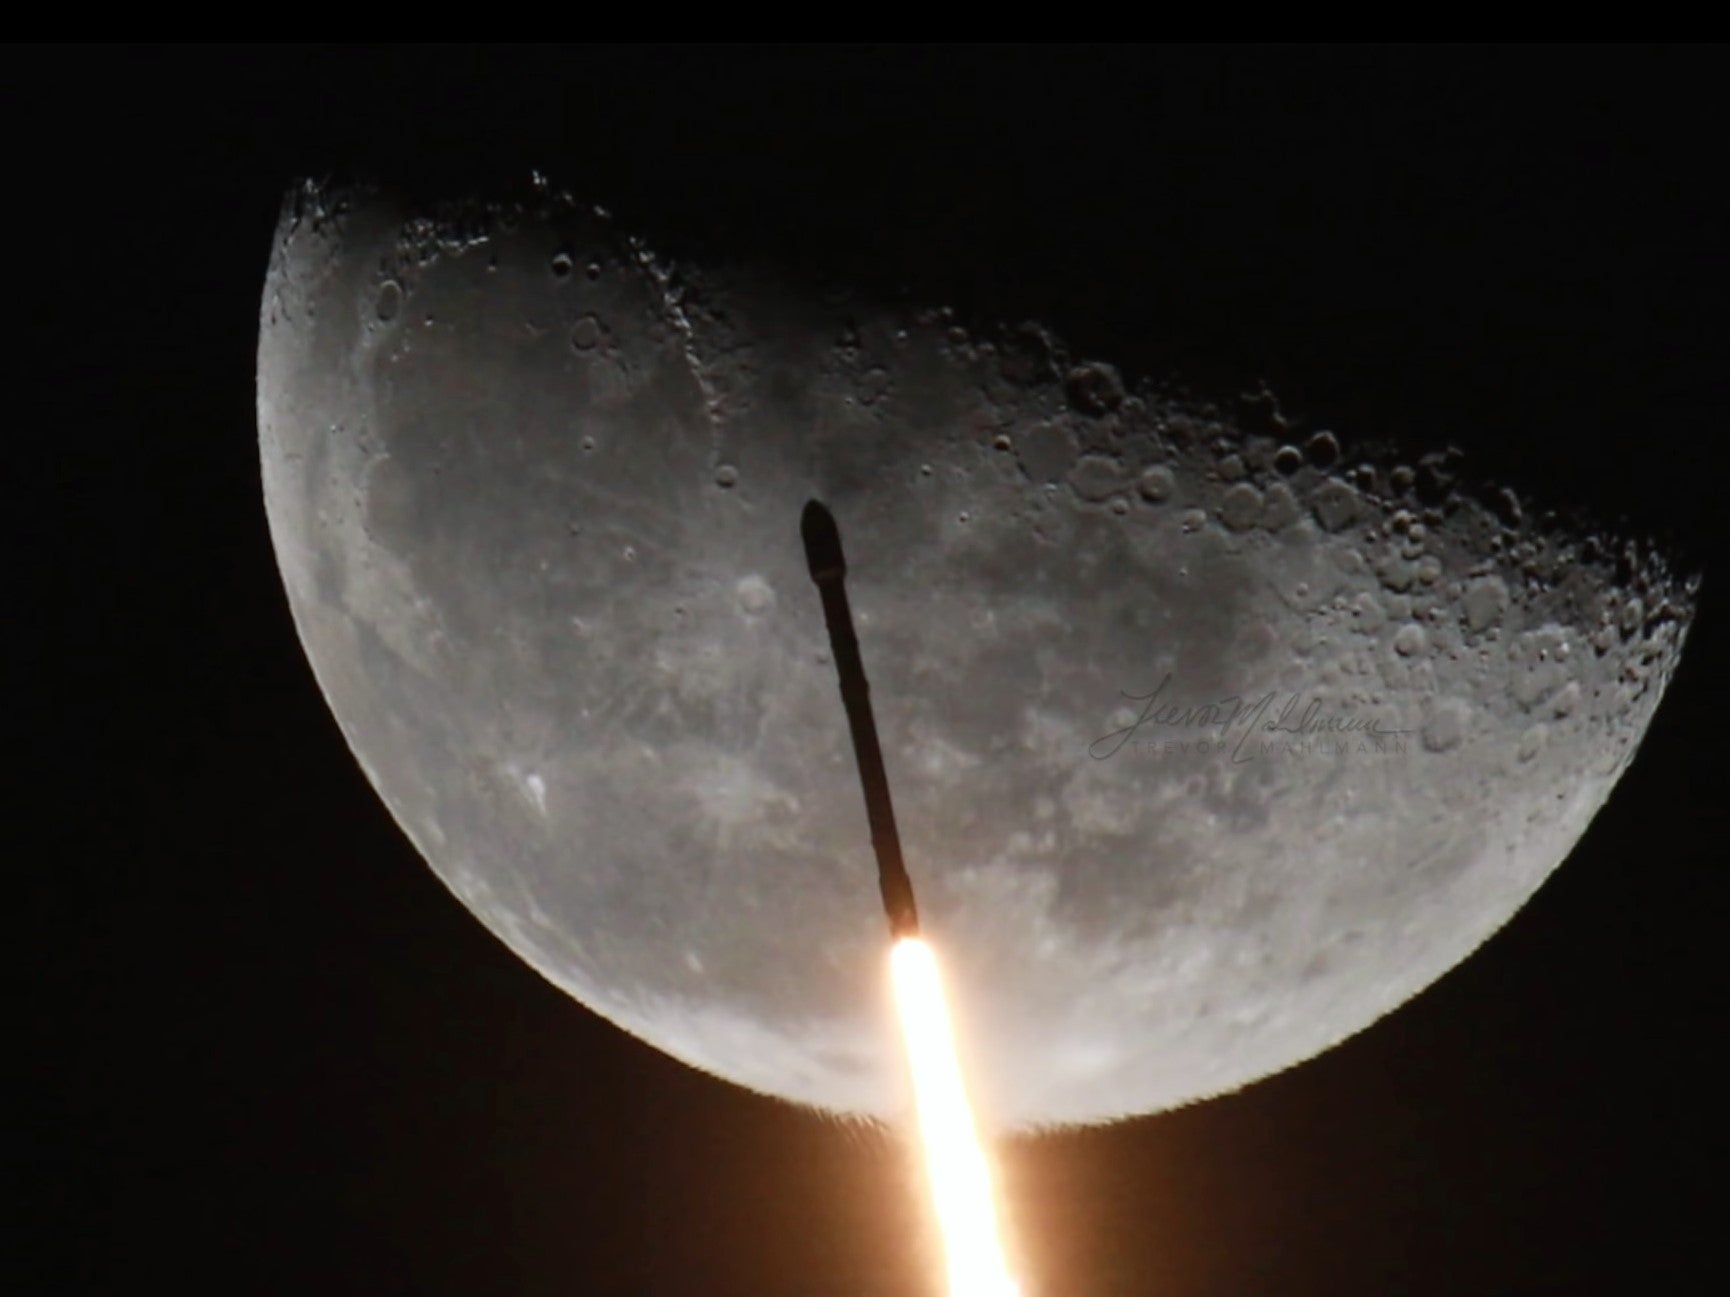 The SpaceX Falcon 9 rocket launched in February 2015 as part of an interplanetary mission